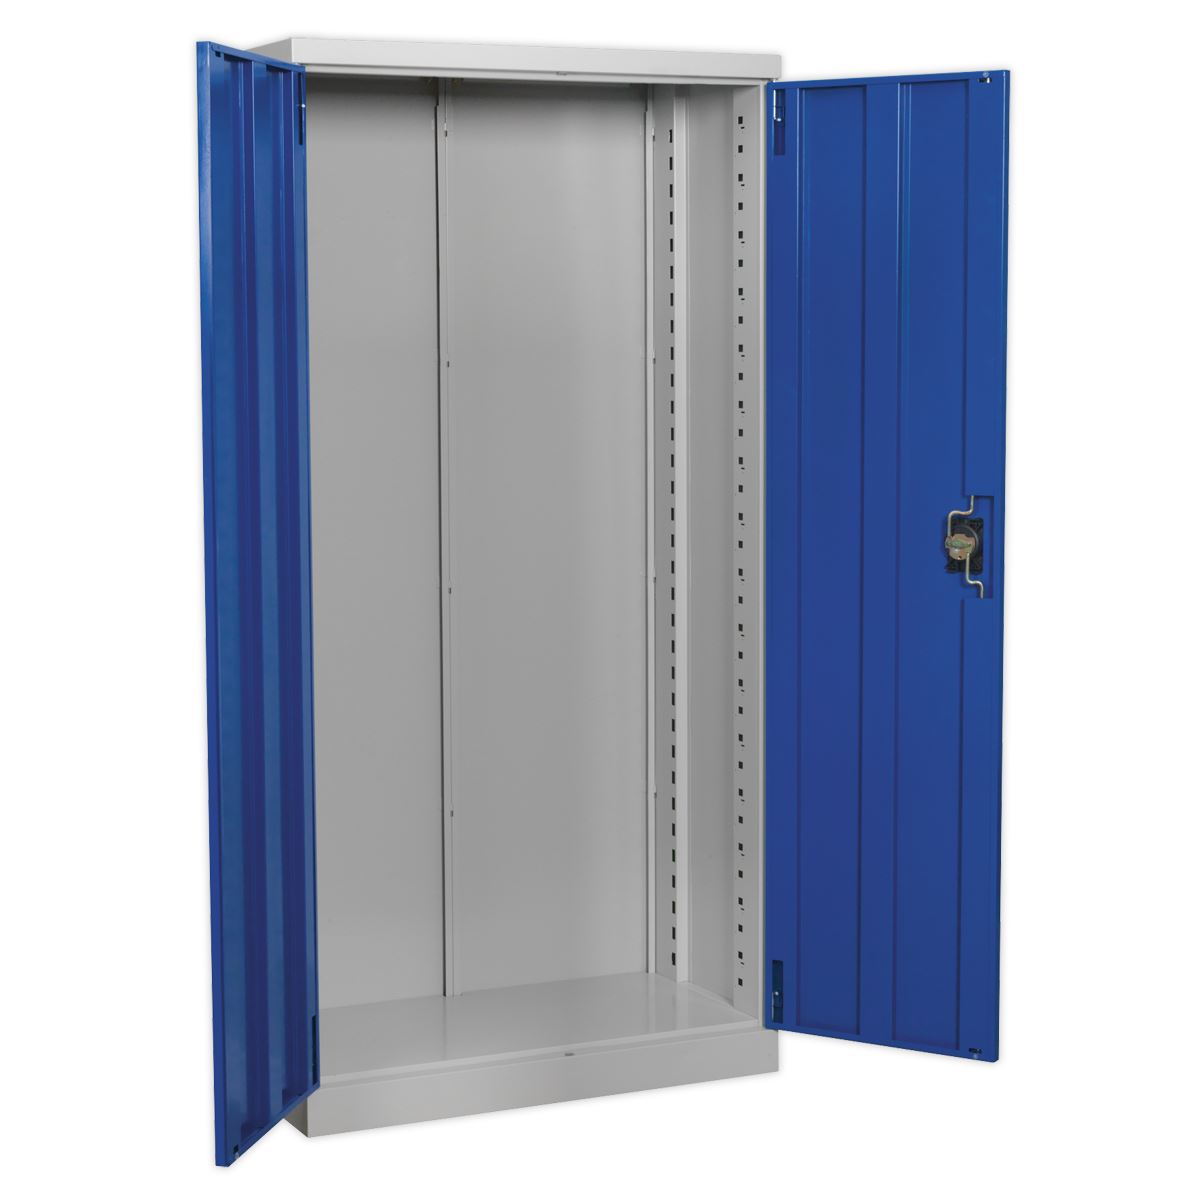 Sealey Premier Industrial Full Height Industrial Cabinet